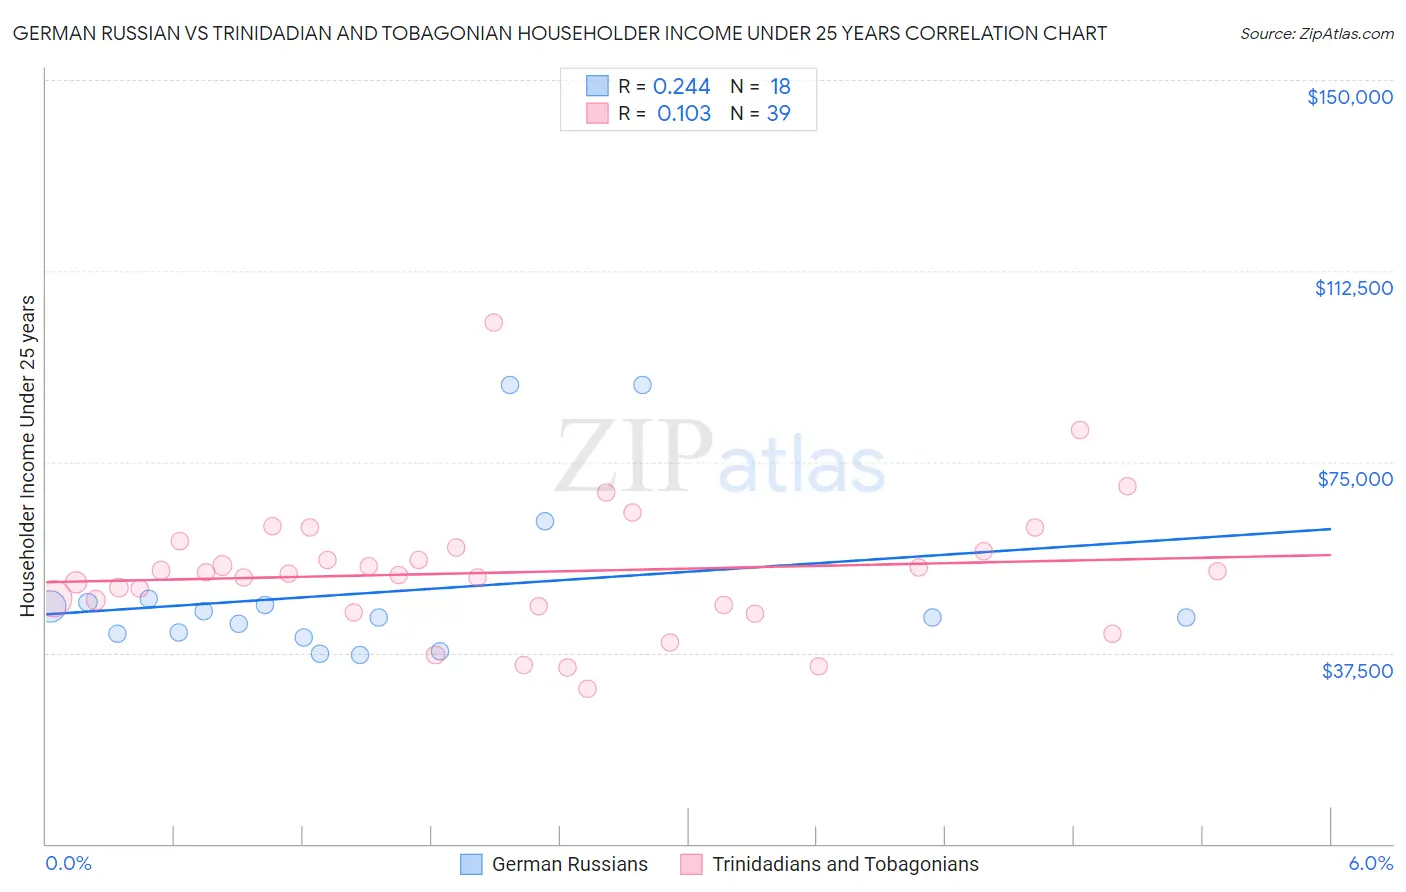 German Russian vs Trinidadian and Tobagonian Householder Income Under 25 years